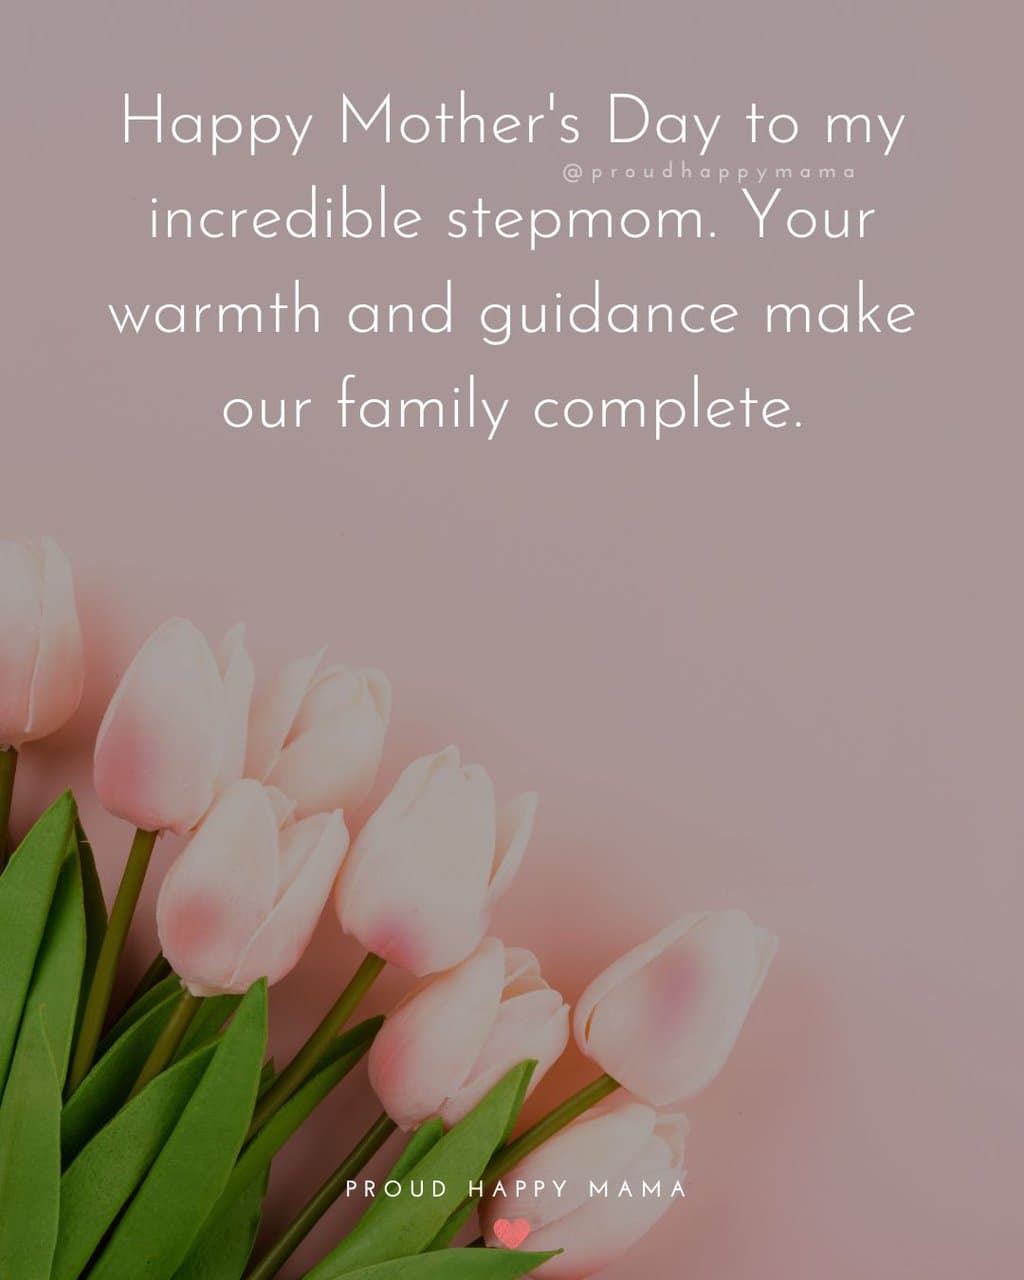 Short Mother's Day Quotes For Stepmom